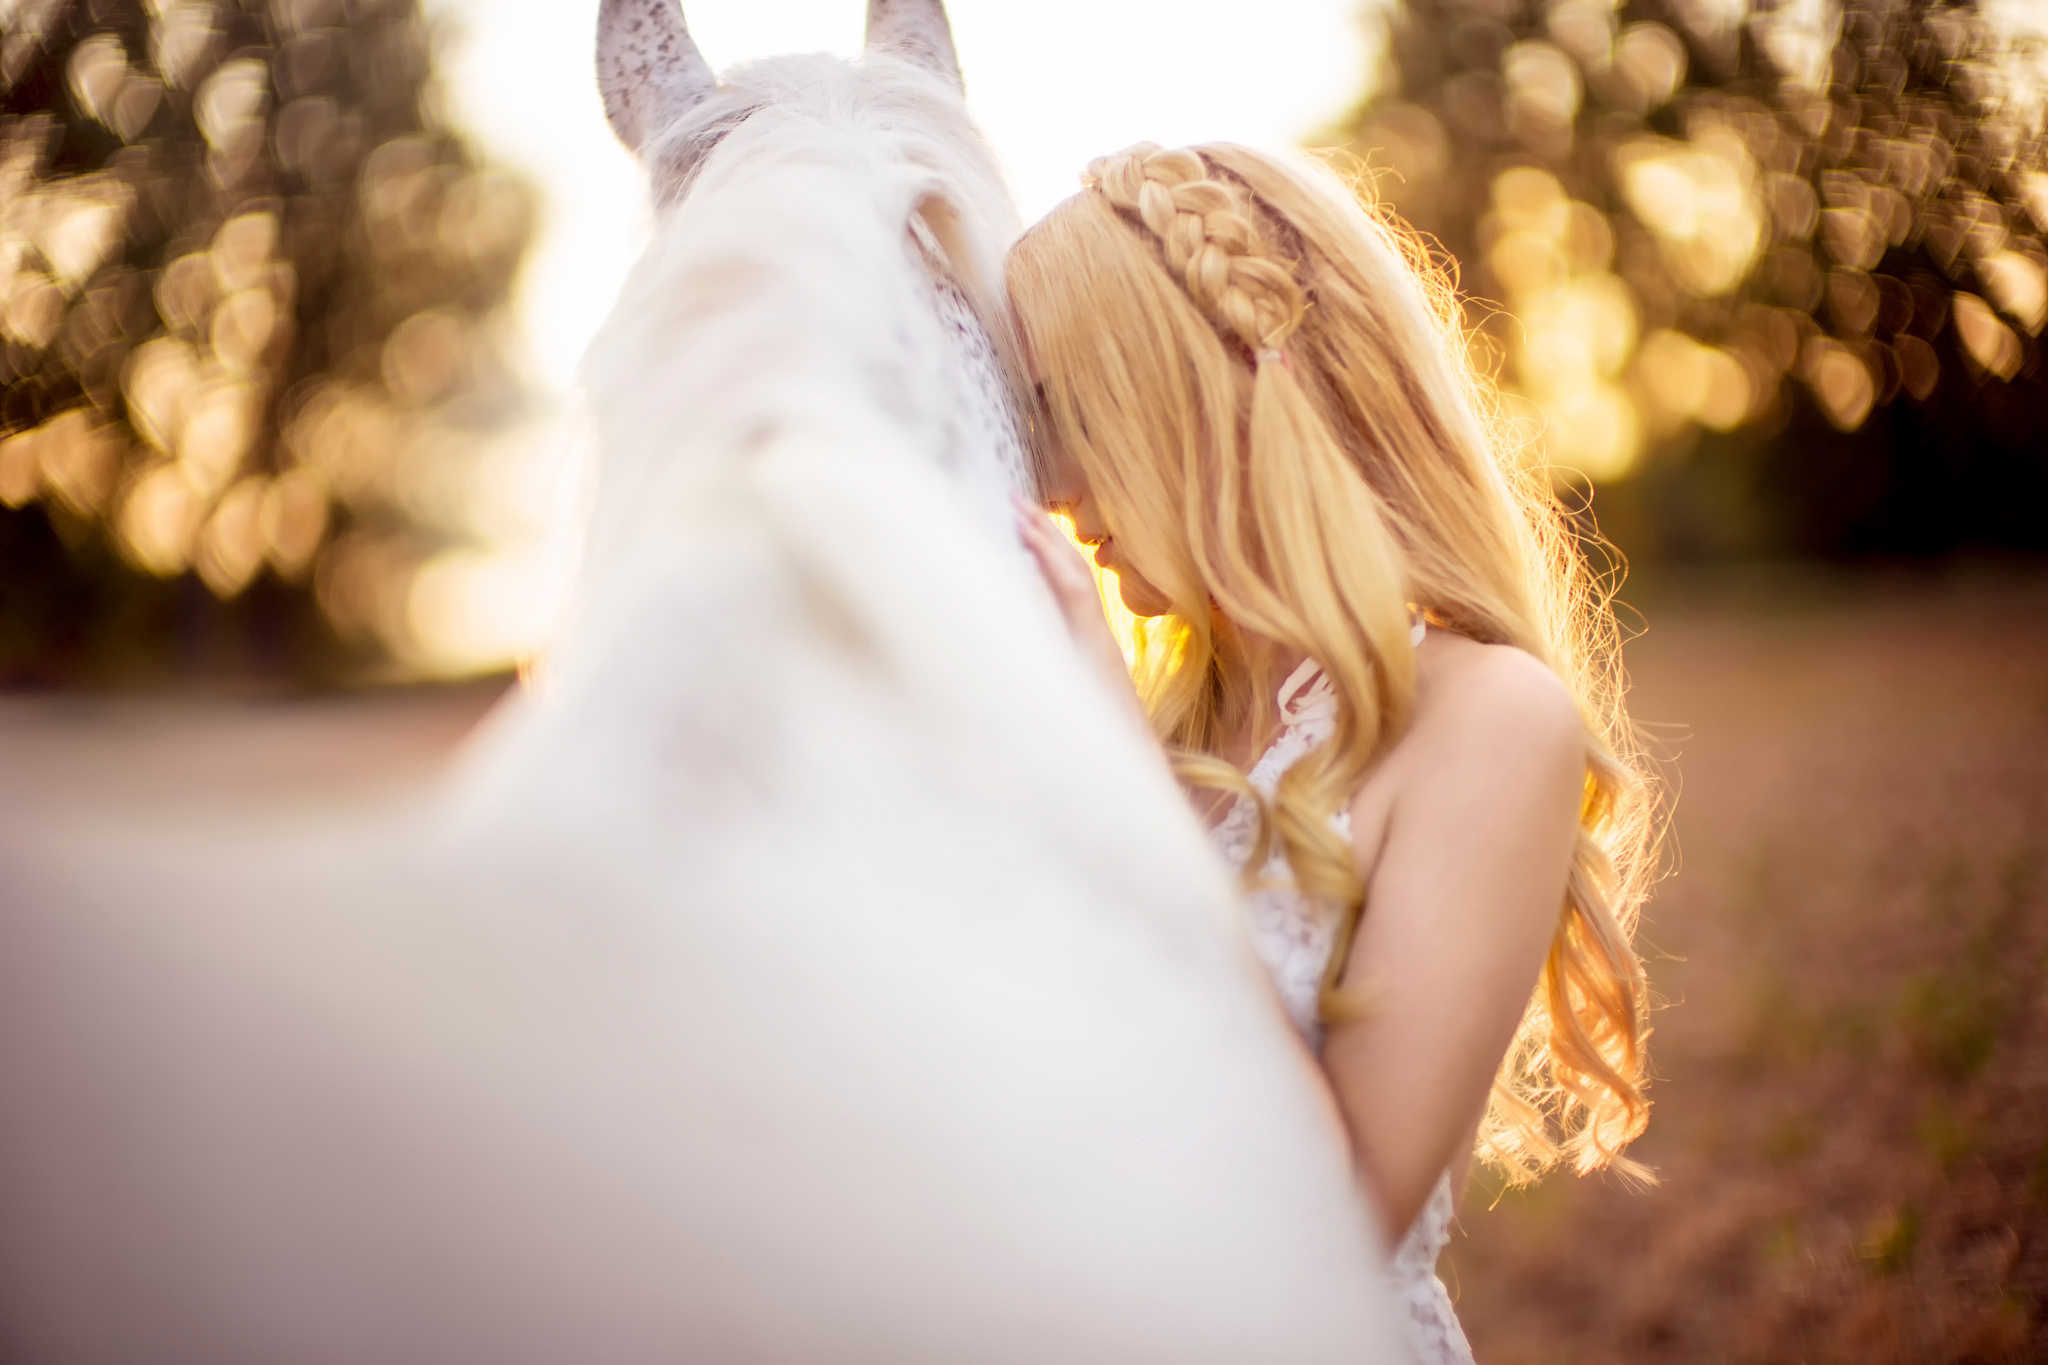 Girl and white horse · free photo